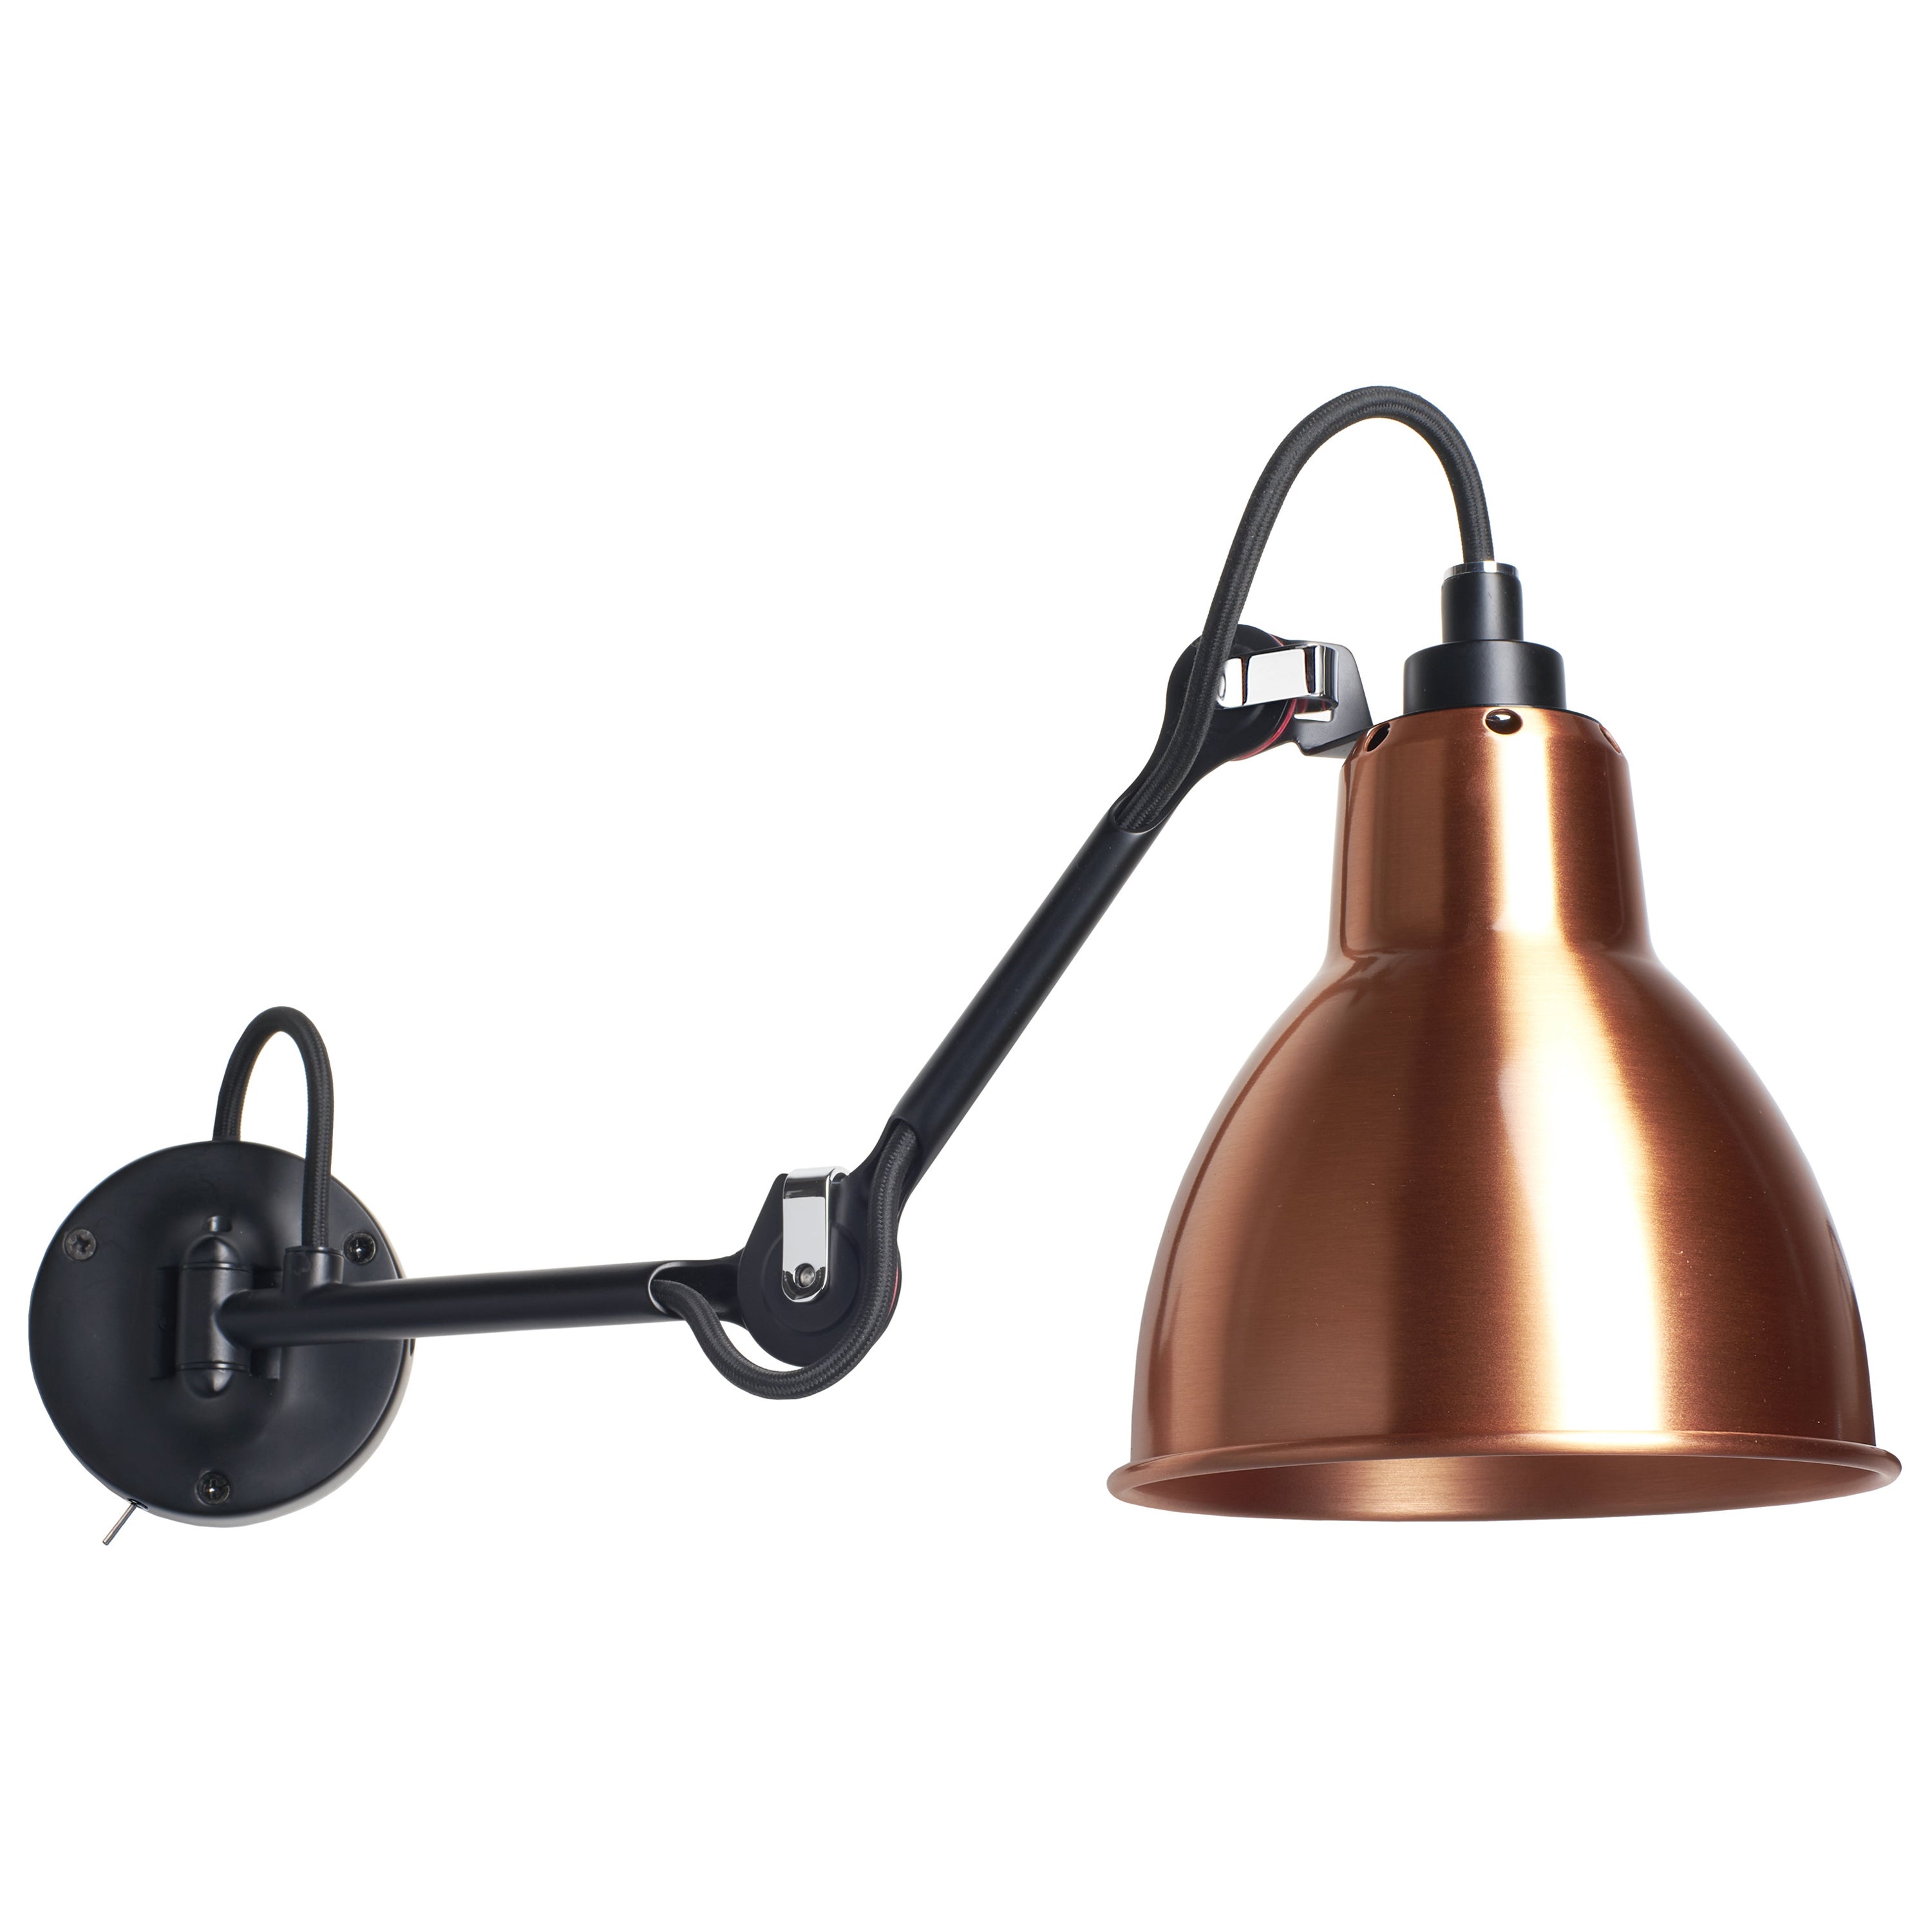 DCW Editions La Lampe Gras N°204 SW Wall Lamp in Black Steel Arm & Copper Shade For Sale